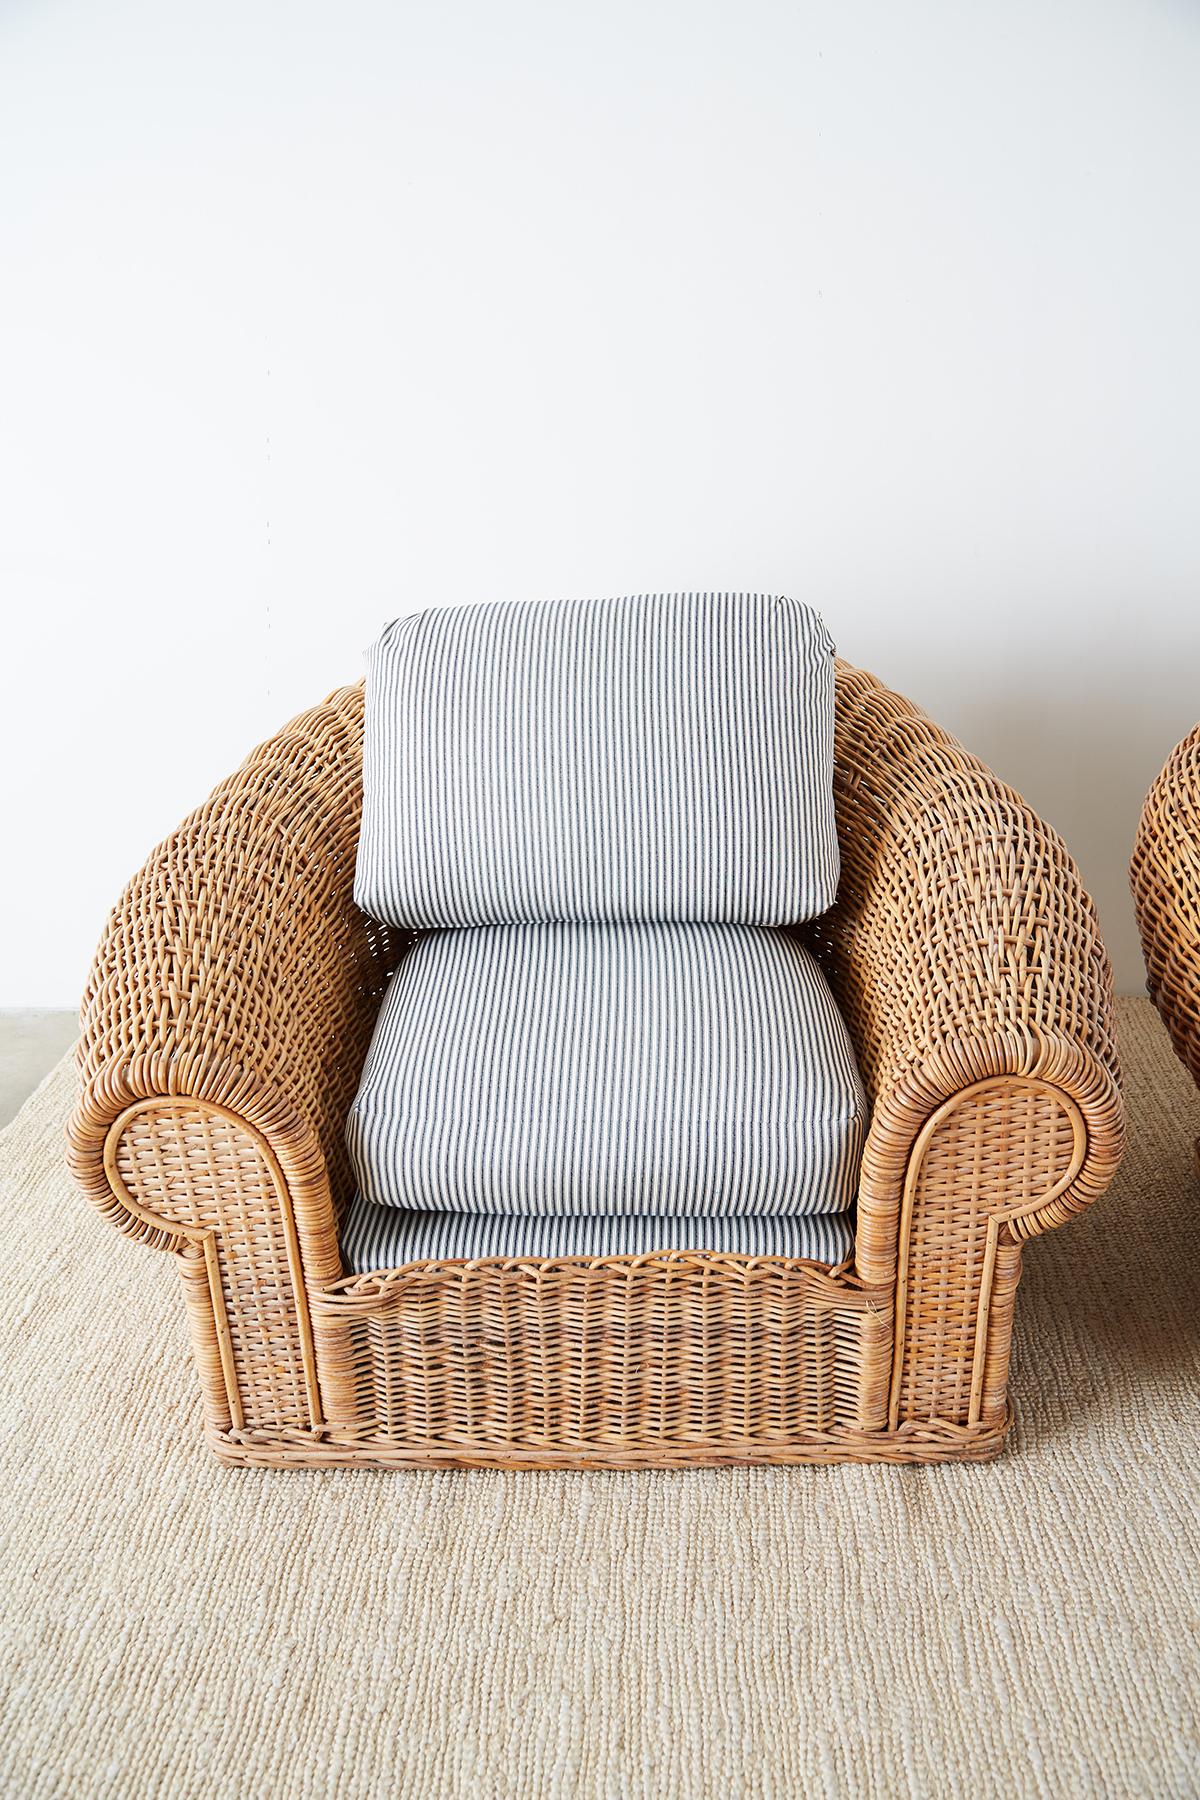 20th Century Michael Taylor Style Wicker Lounge Chairs with Ottoman